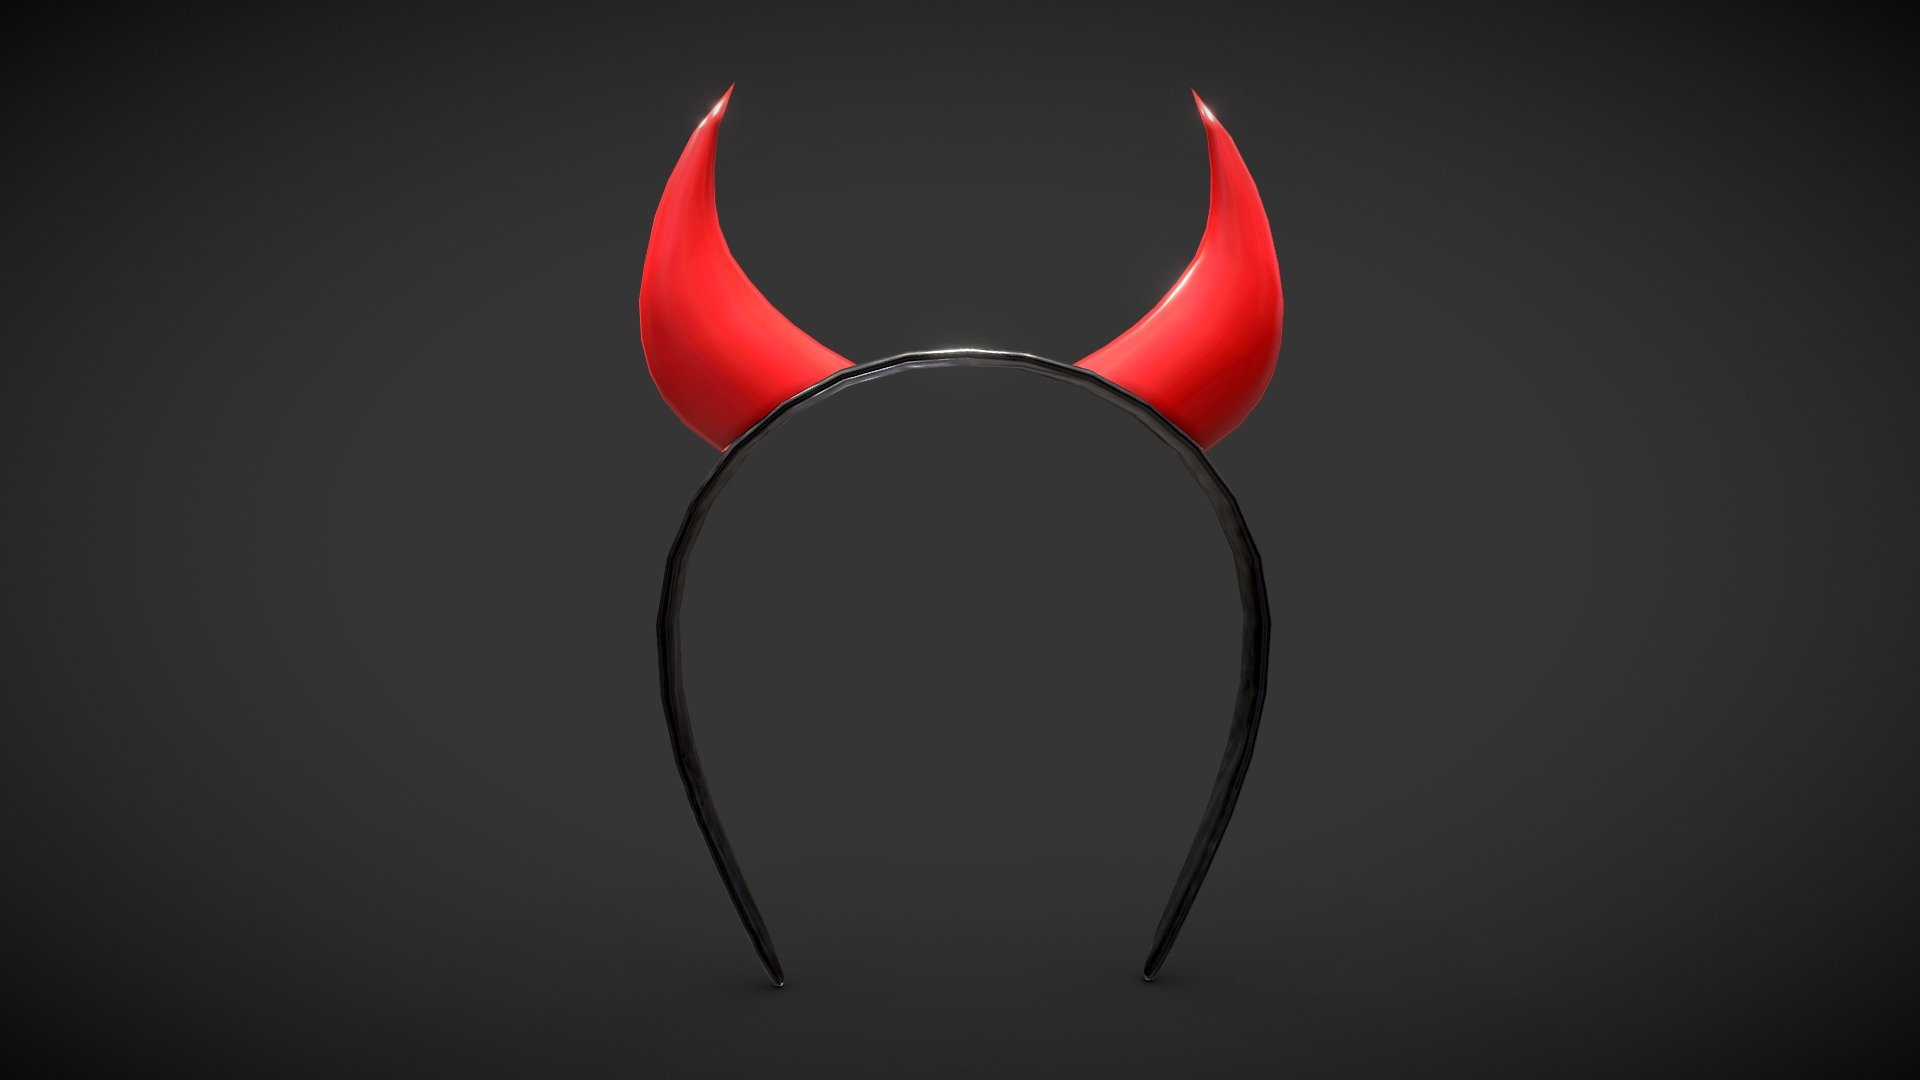 Devil Horns Headband - low poly

4096x4096 PNG texture

Triangles: 1.5k
Vertices: 774




my party / birthday collection &lt;&lt;

Hats - Headwear &lt;&lt;
 - Devil Headband - Low Poly - Buy Royalty Free 3D model by Karolina Renkiewicz (@KarolinaRenkiewicz) 3d model